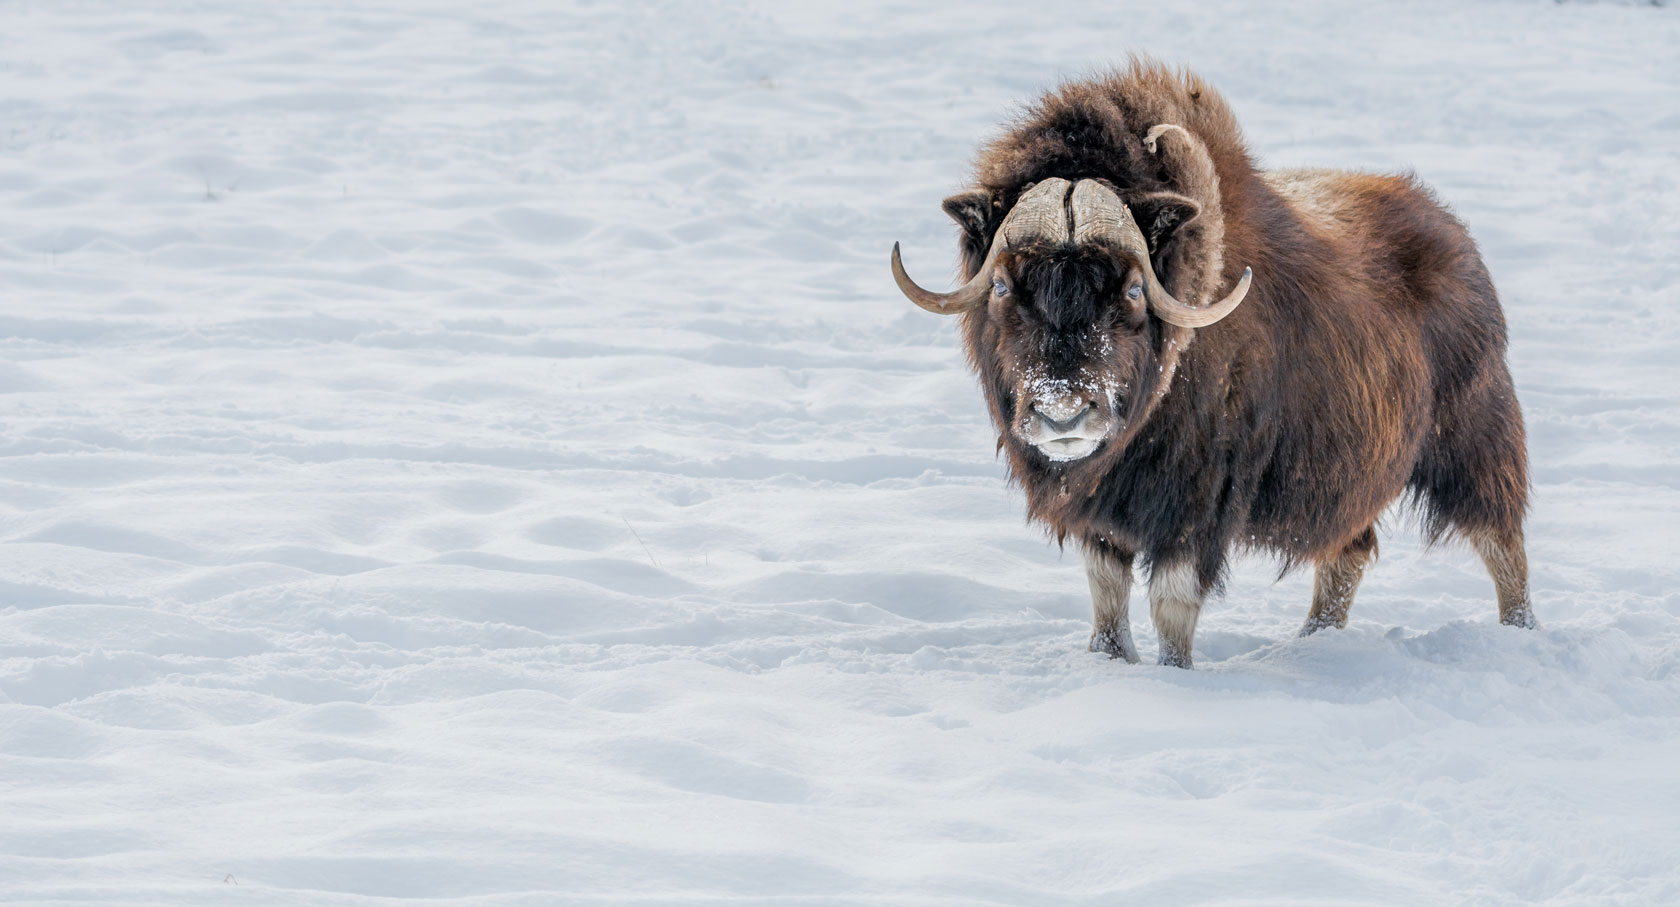 Muskox standing in the snow